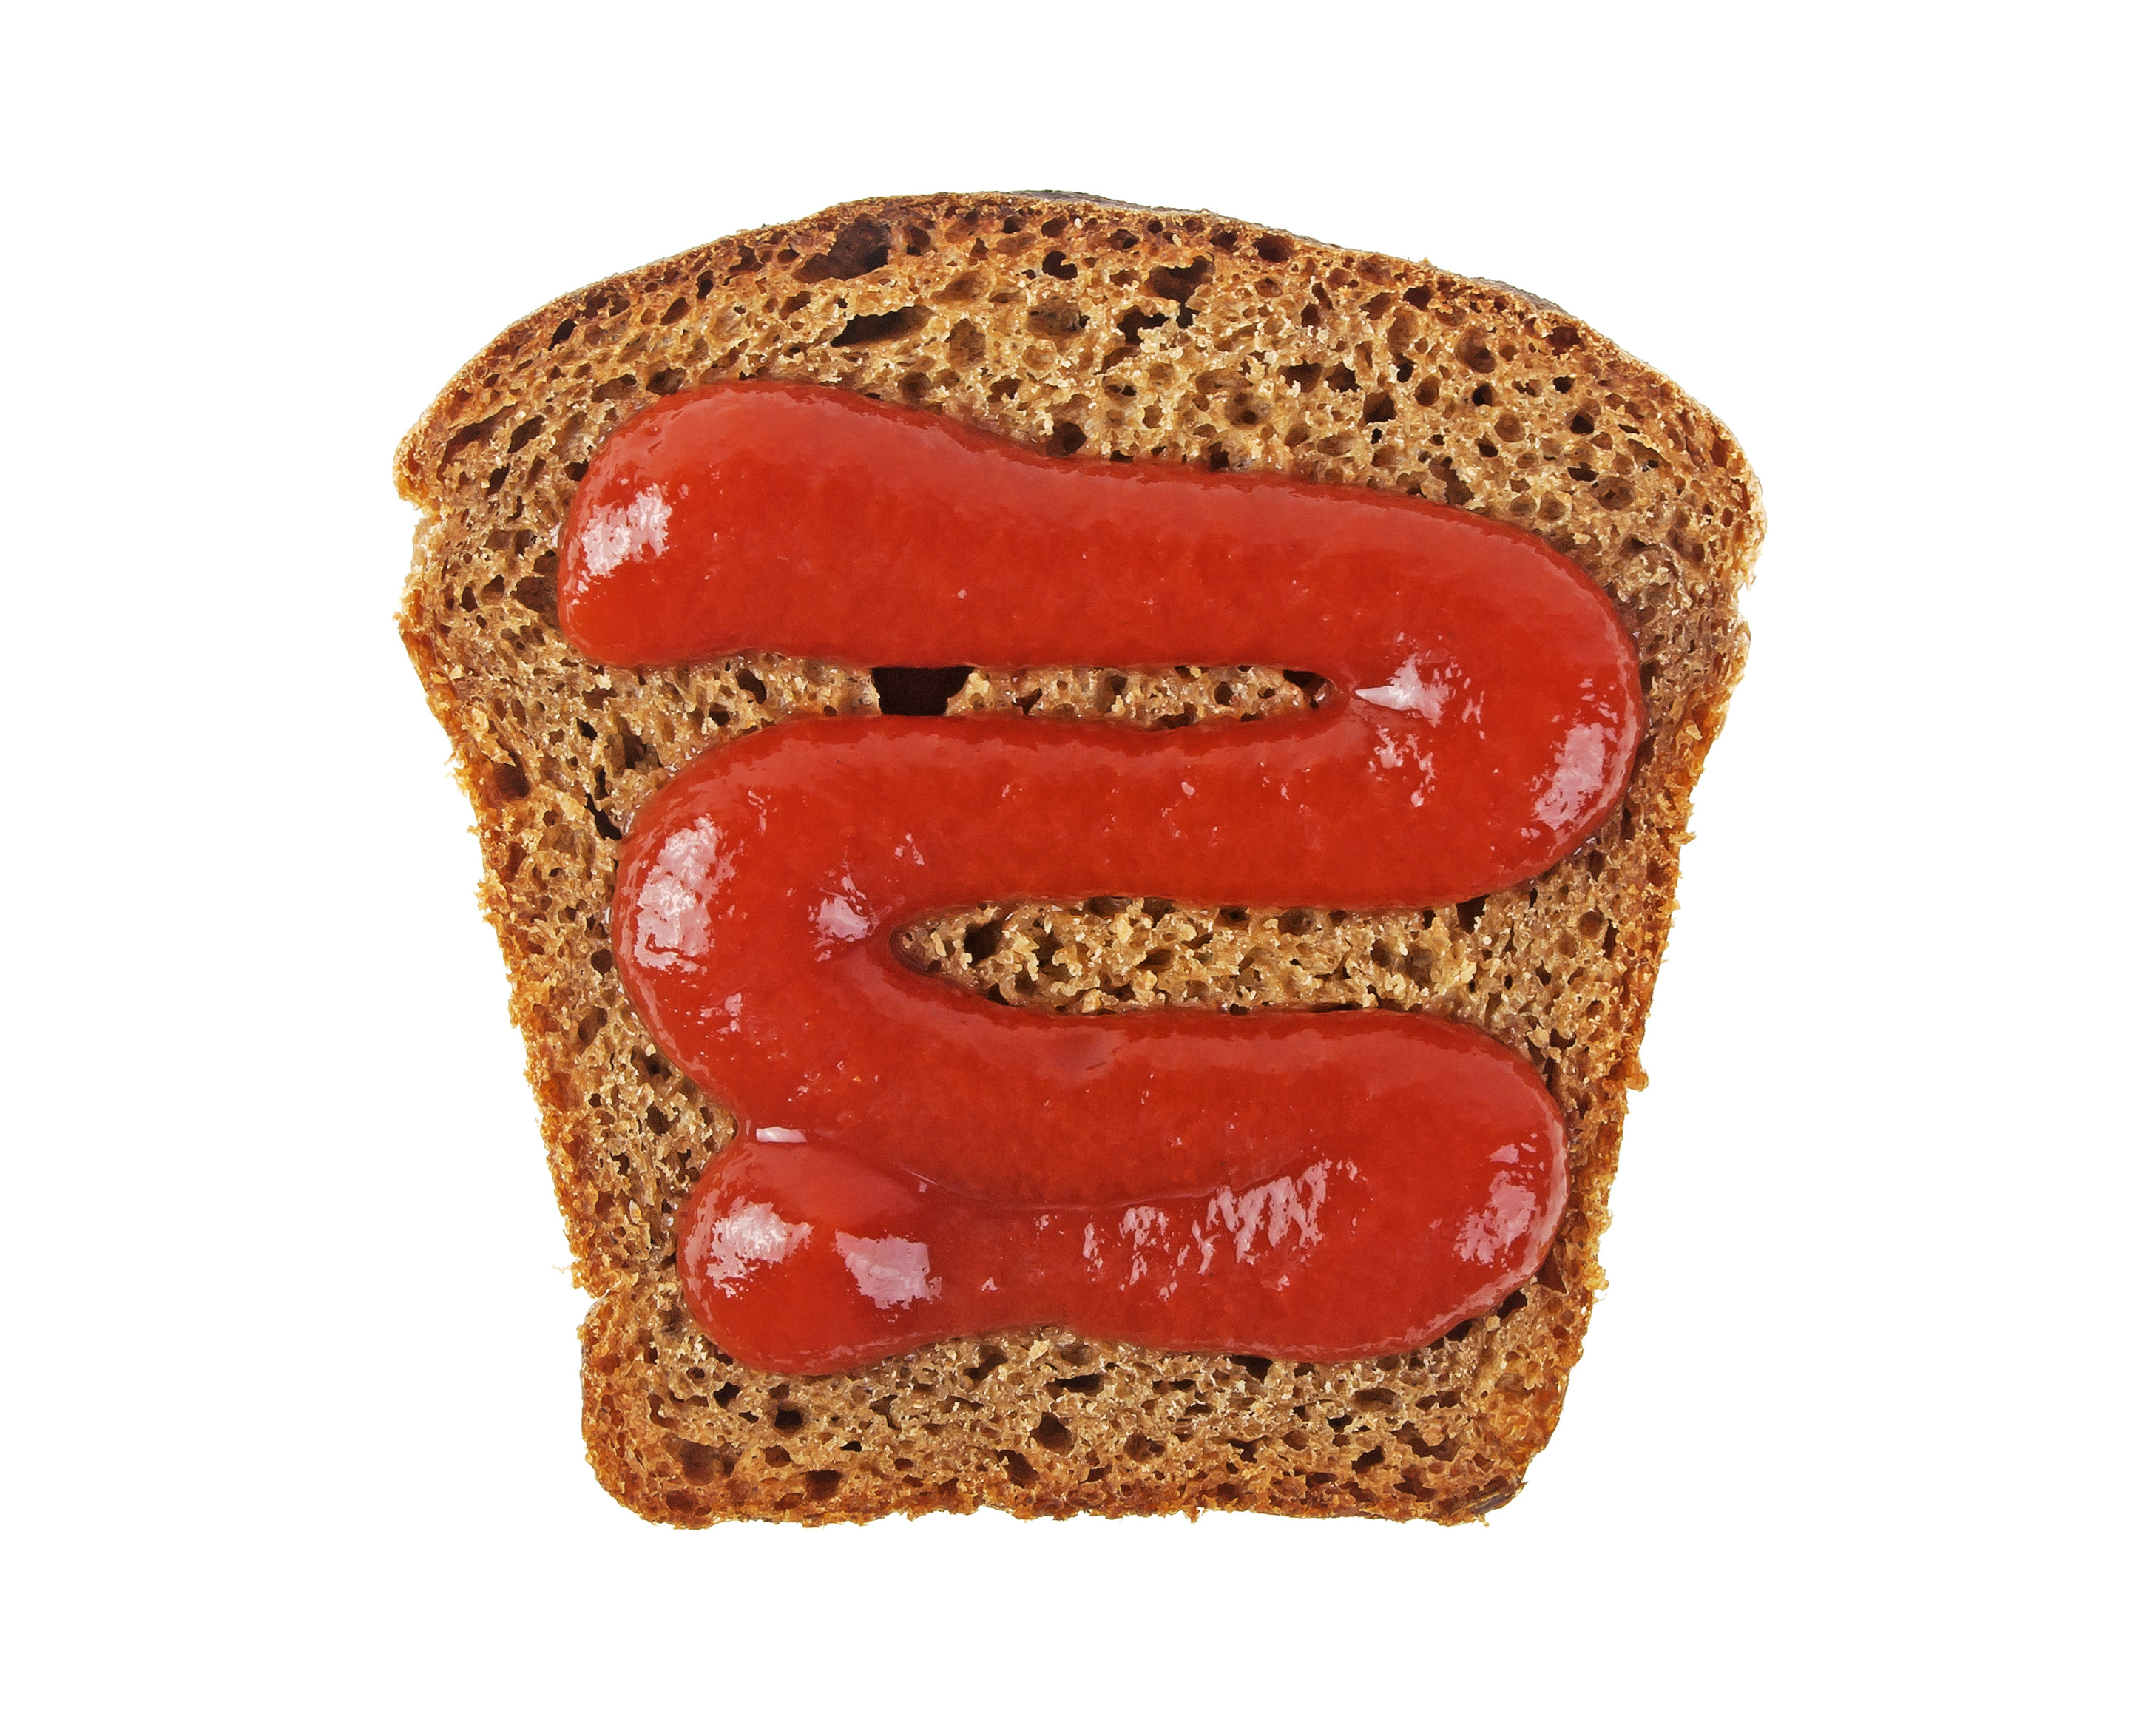 Slice of wheat bread with a swirl of ketchup